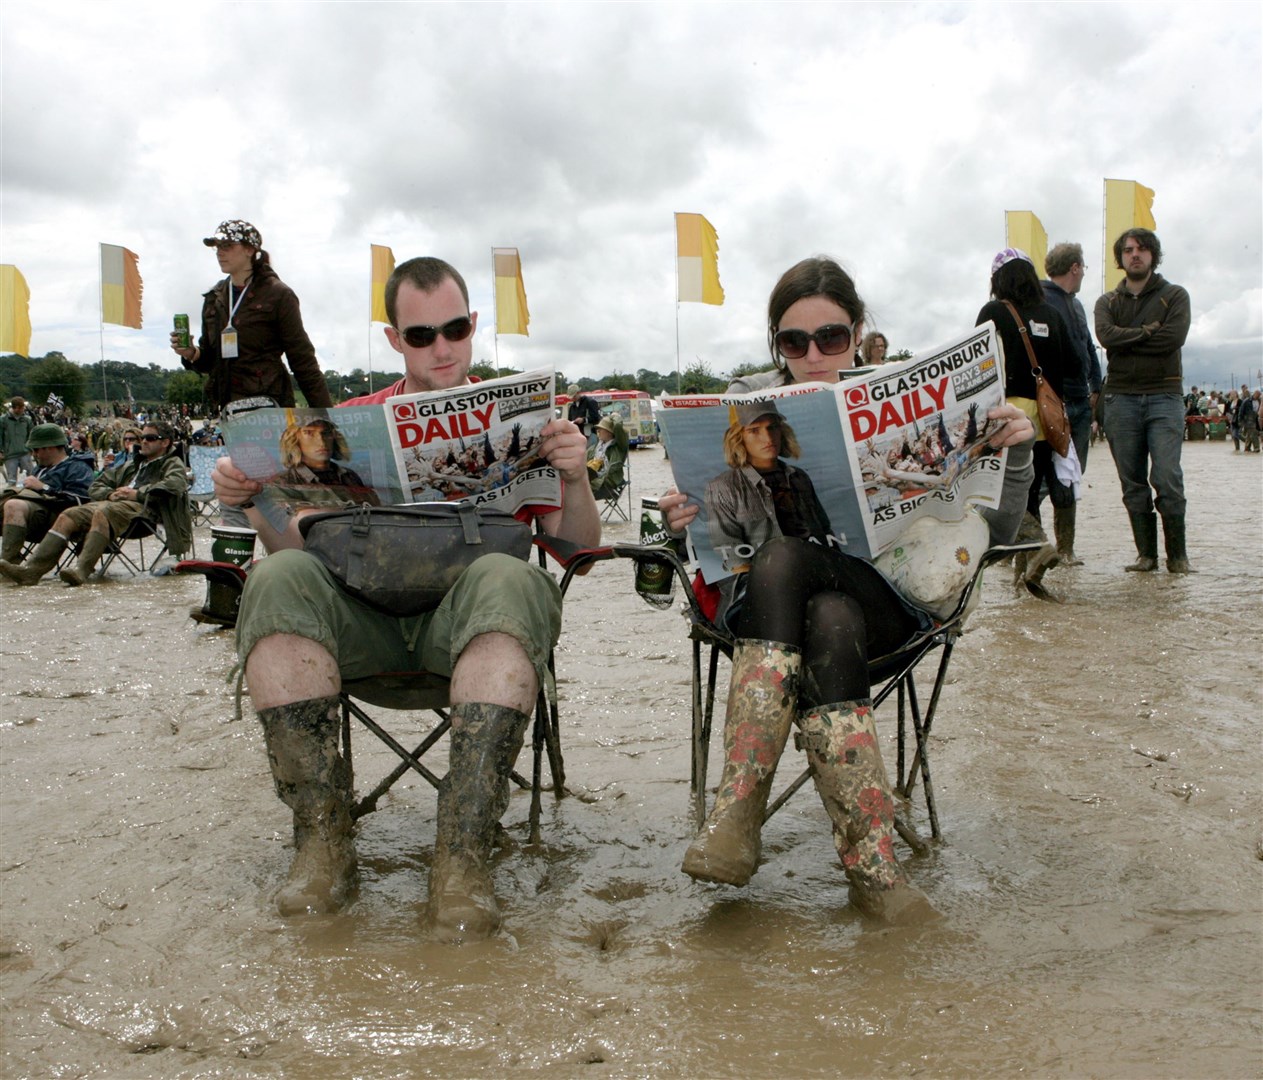 A couple read the free paper at a previous wet Glastonbury Festival at Worthy Farm in Pilton, Somerset (Anthony Devlin/PA)